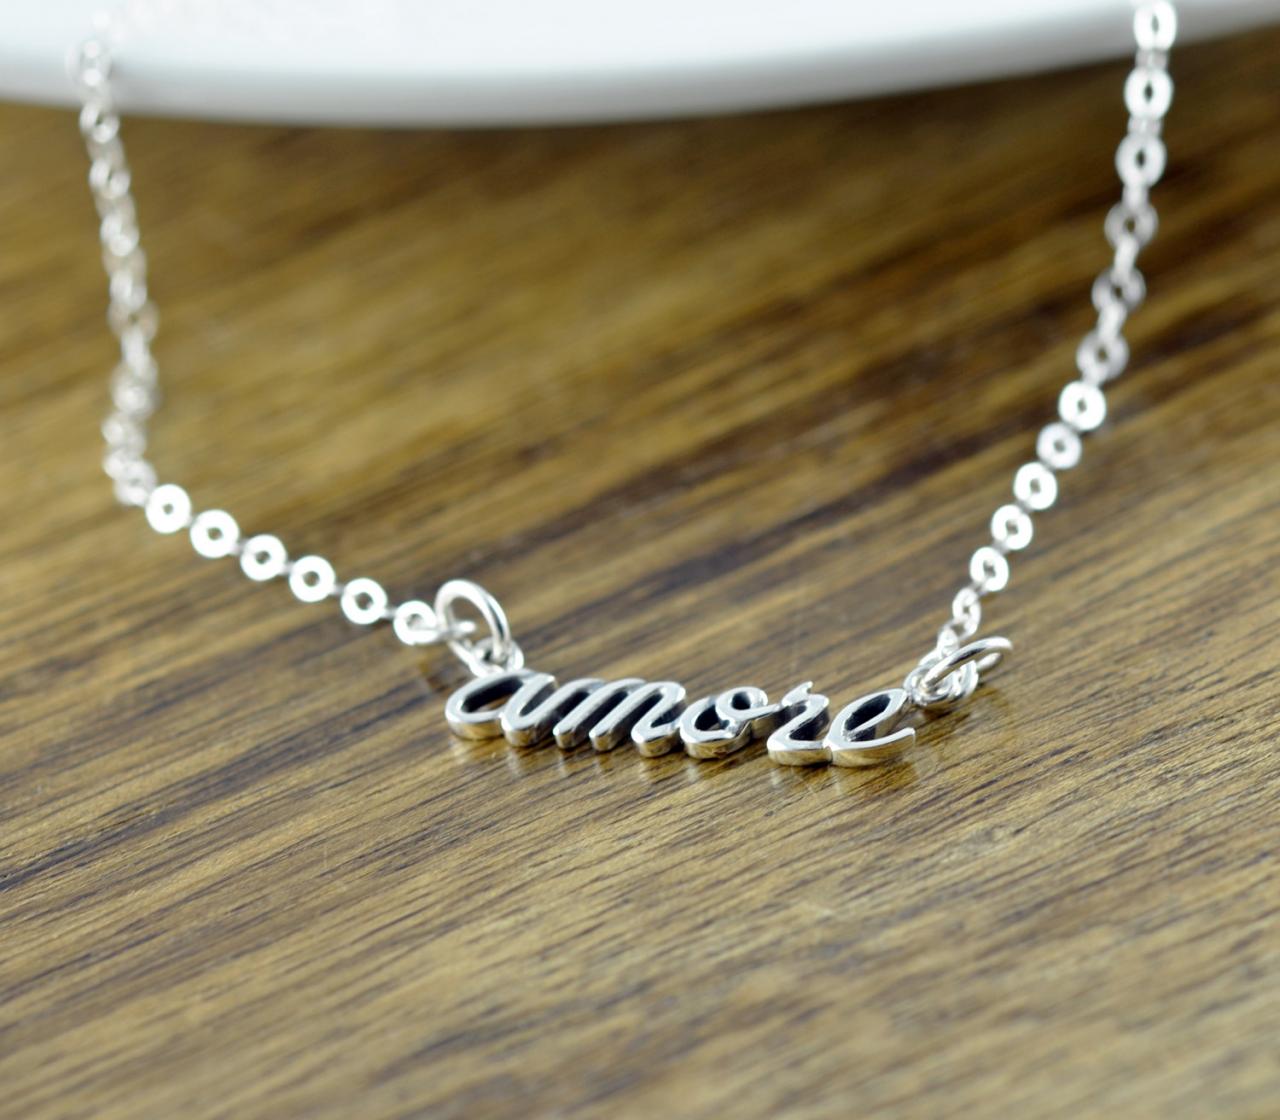 Script Name Necklace, Amore Necklace, Amore Script Necklace, Script Necklace, Bridesmaid Jewelry, Valentines Day, Gift Idea, Gift For Her